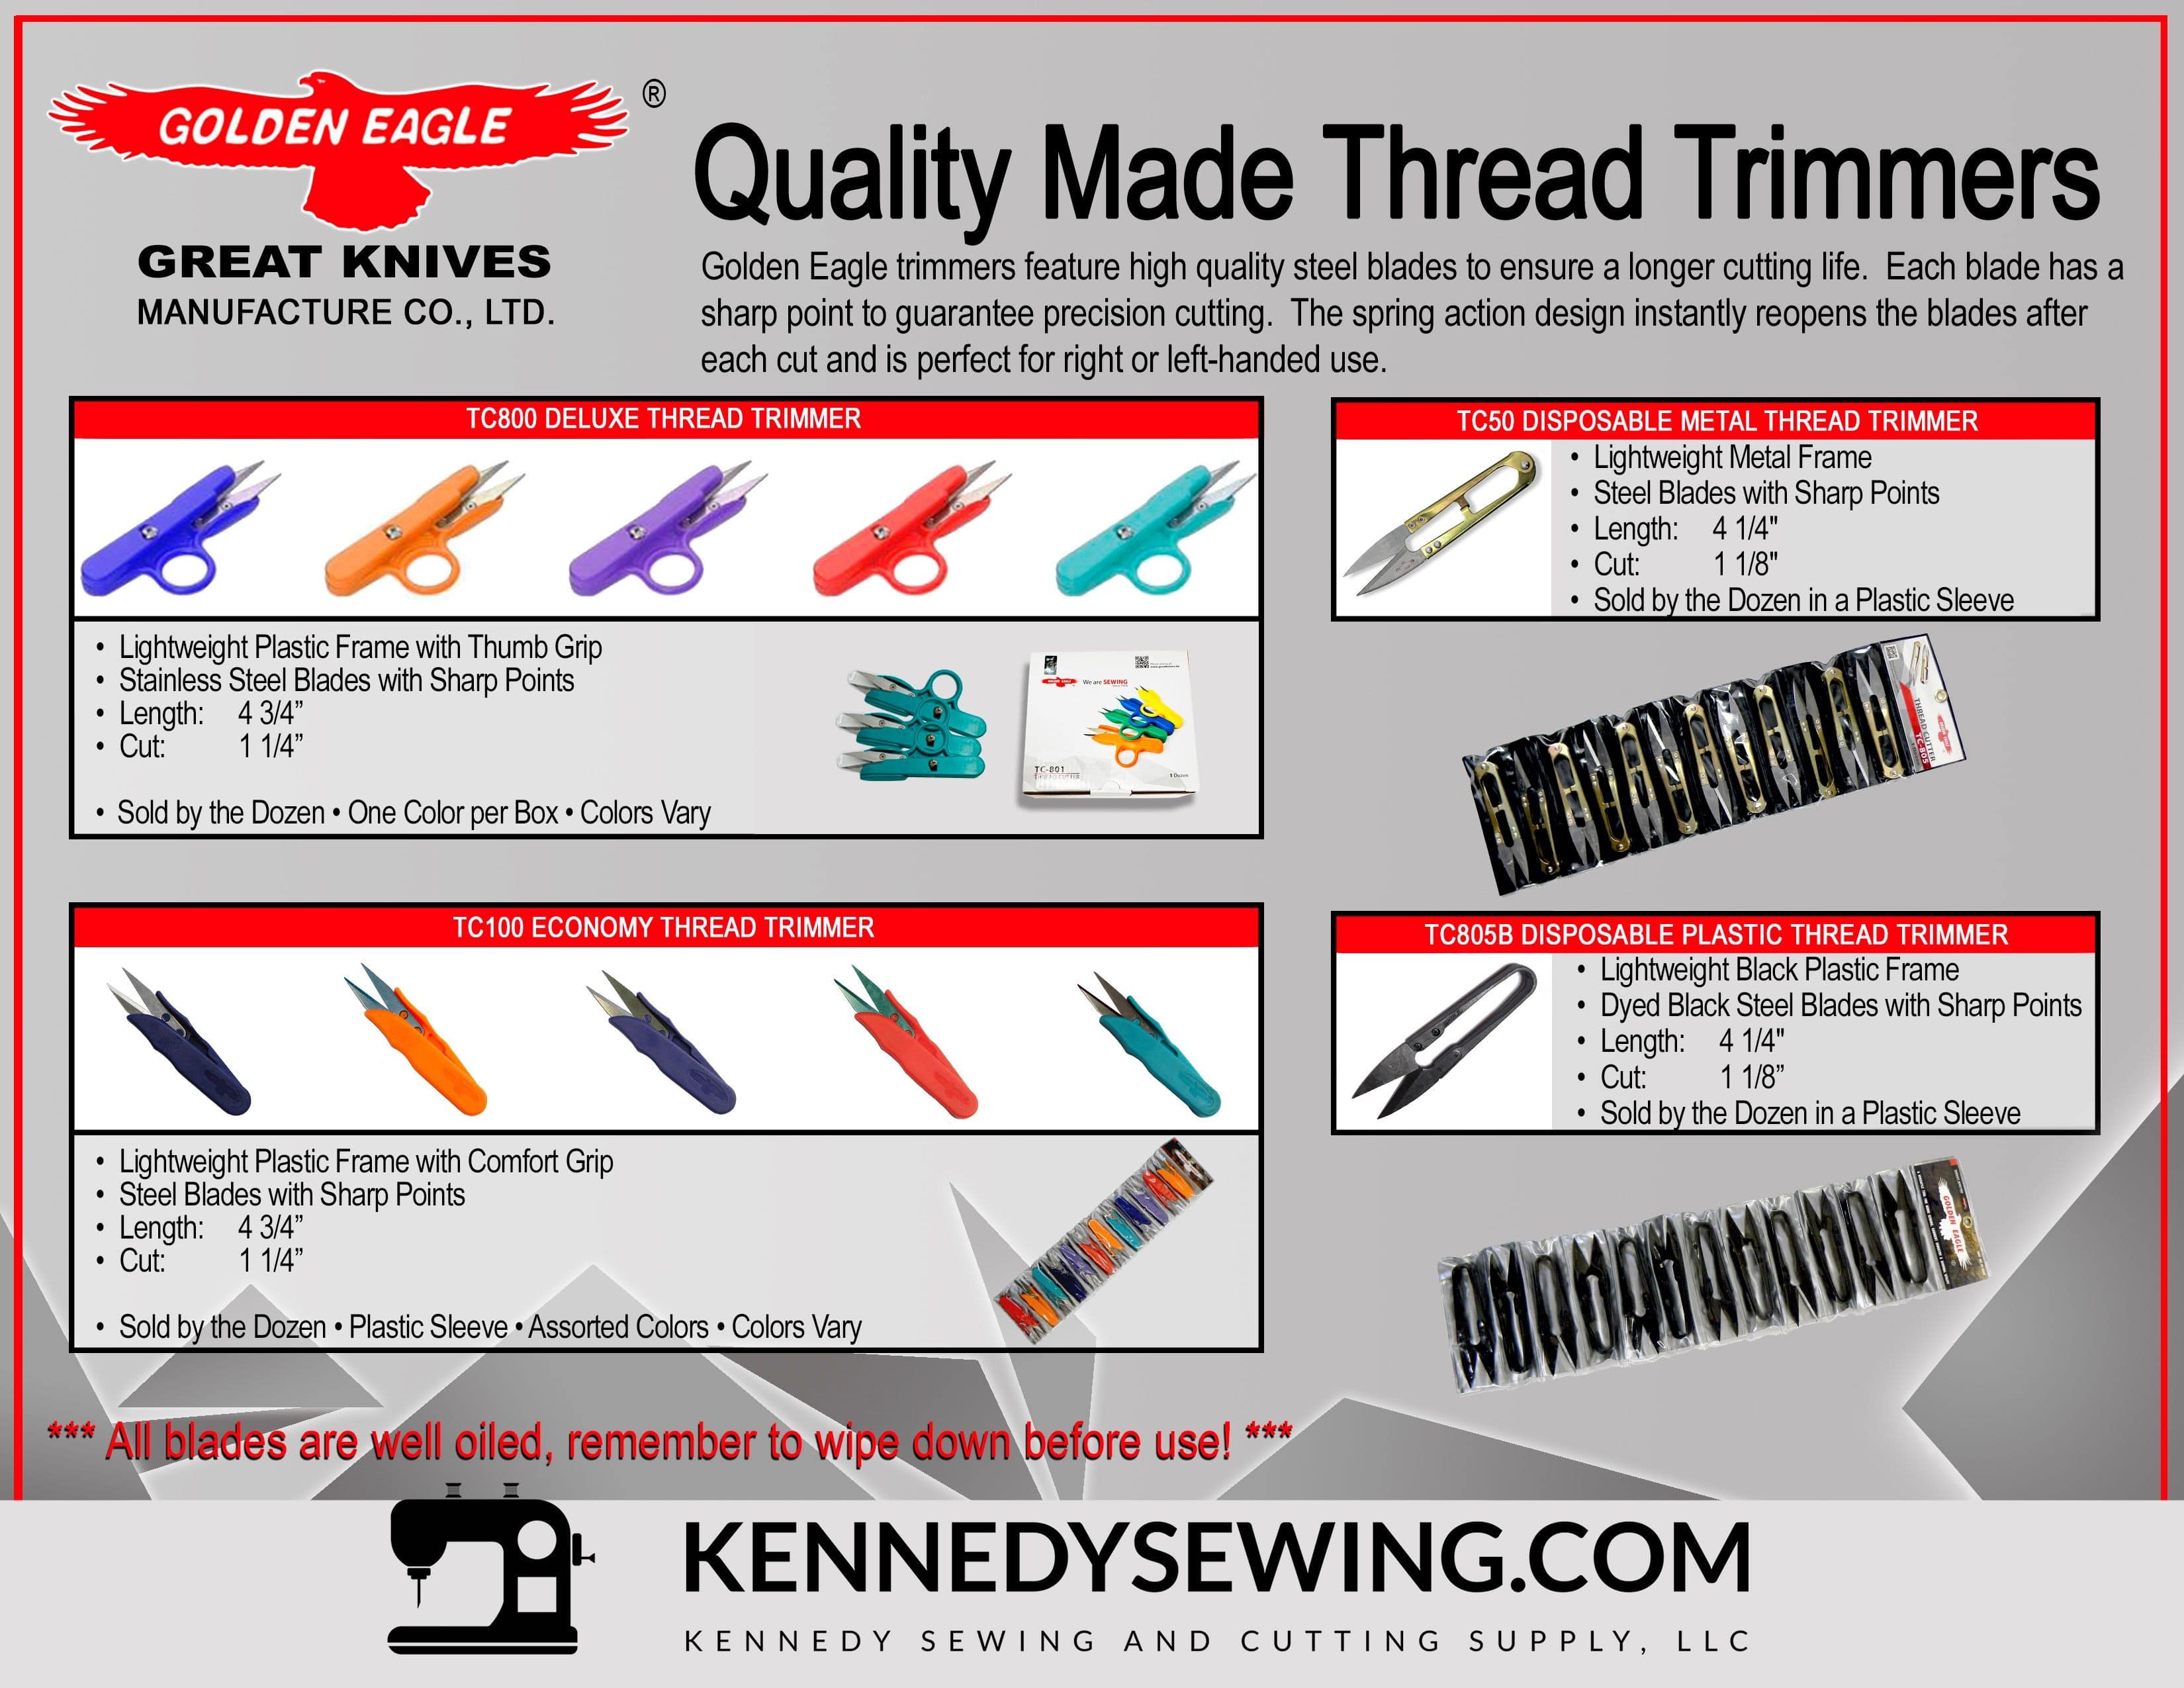 GOLDEN EAGLE
QUALITY MADE THREAD TRIMMERS